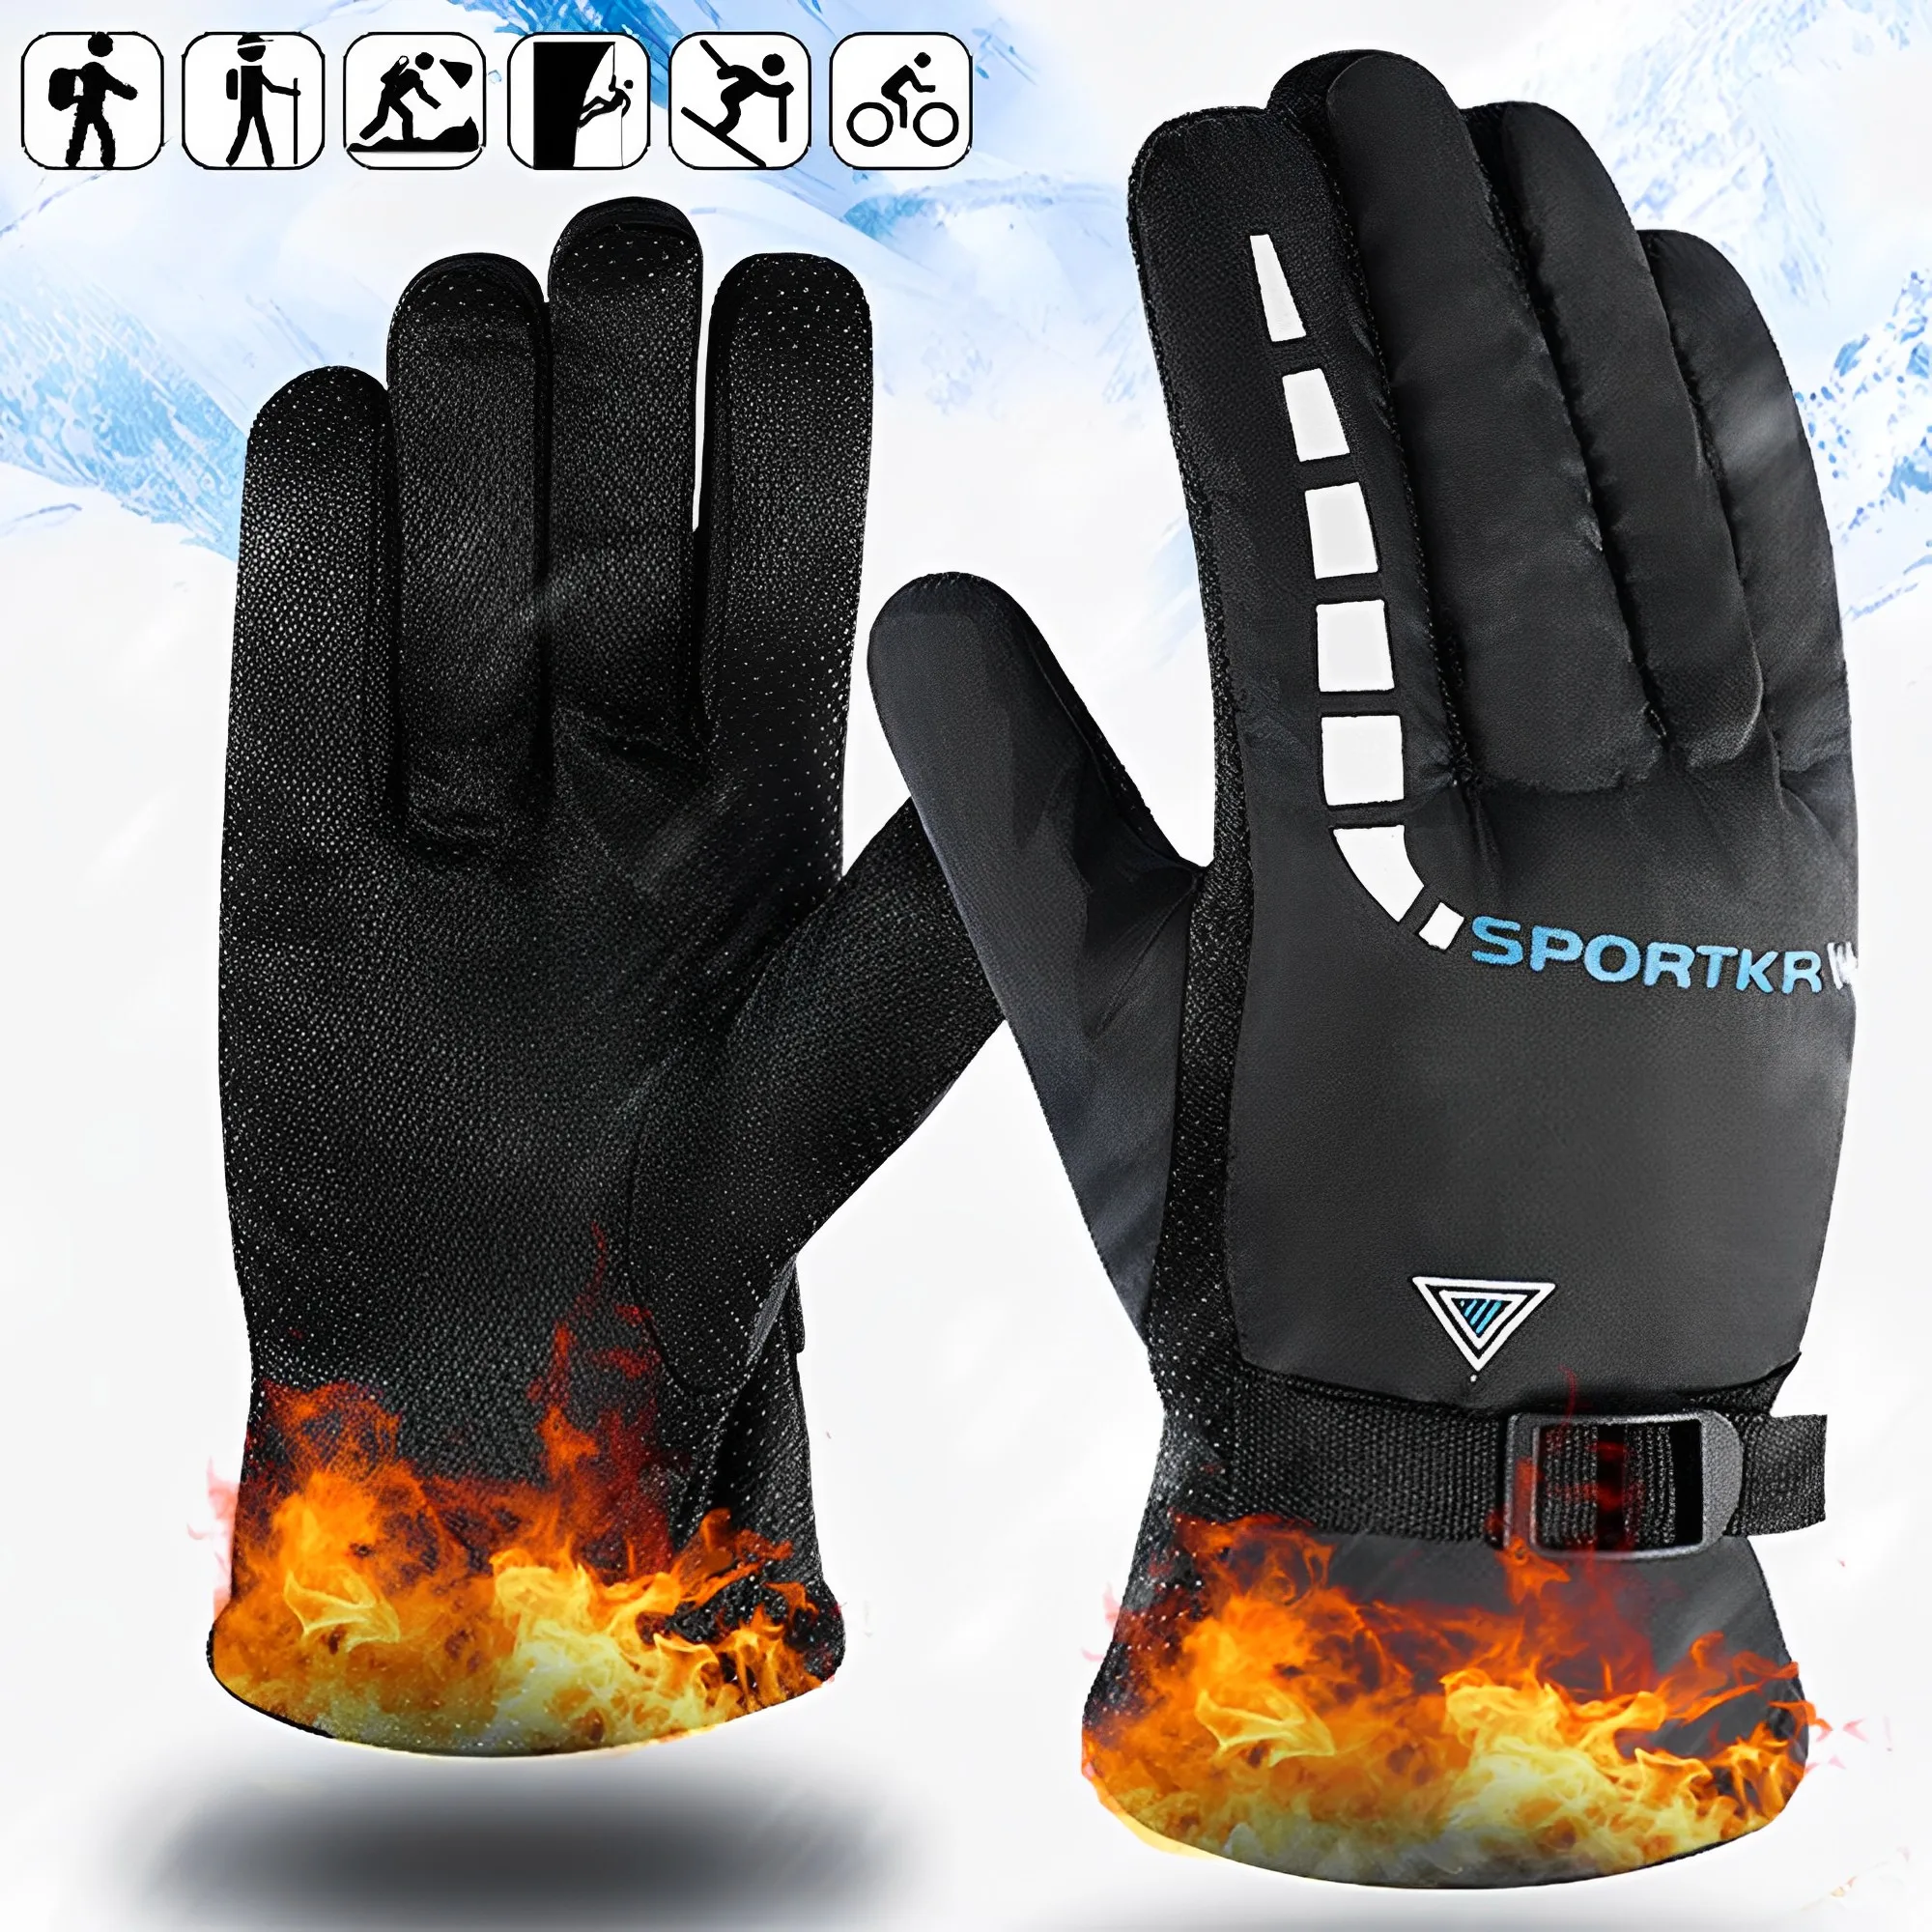 Motorcycle Cycling Gloves Winter Outdoor Waterproof Skiing Riding Hiking Warm - £13.83 GBP